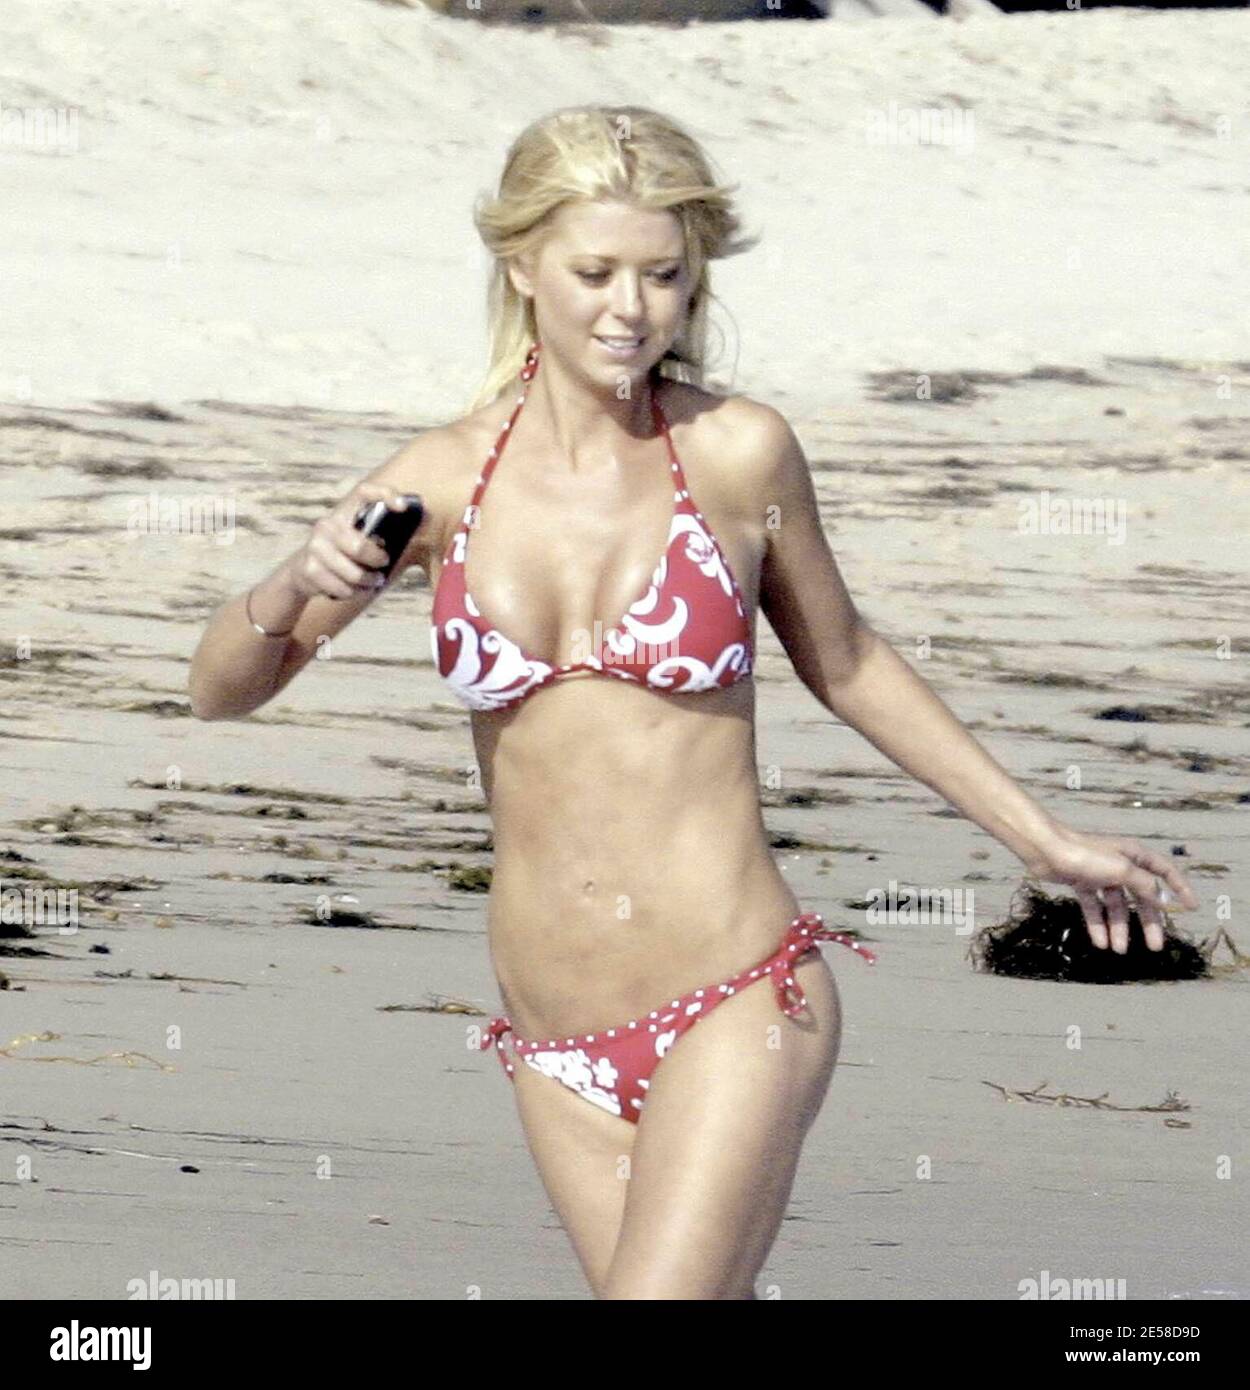 Tara Reid takes to the beach for some fun and games sporting a red and  white bikini. Even though the actress has undergone corrective procedures  for botched plastic surgery, Reid still shows